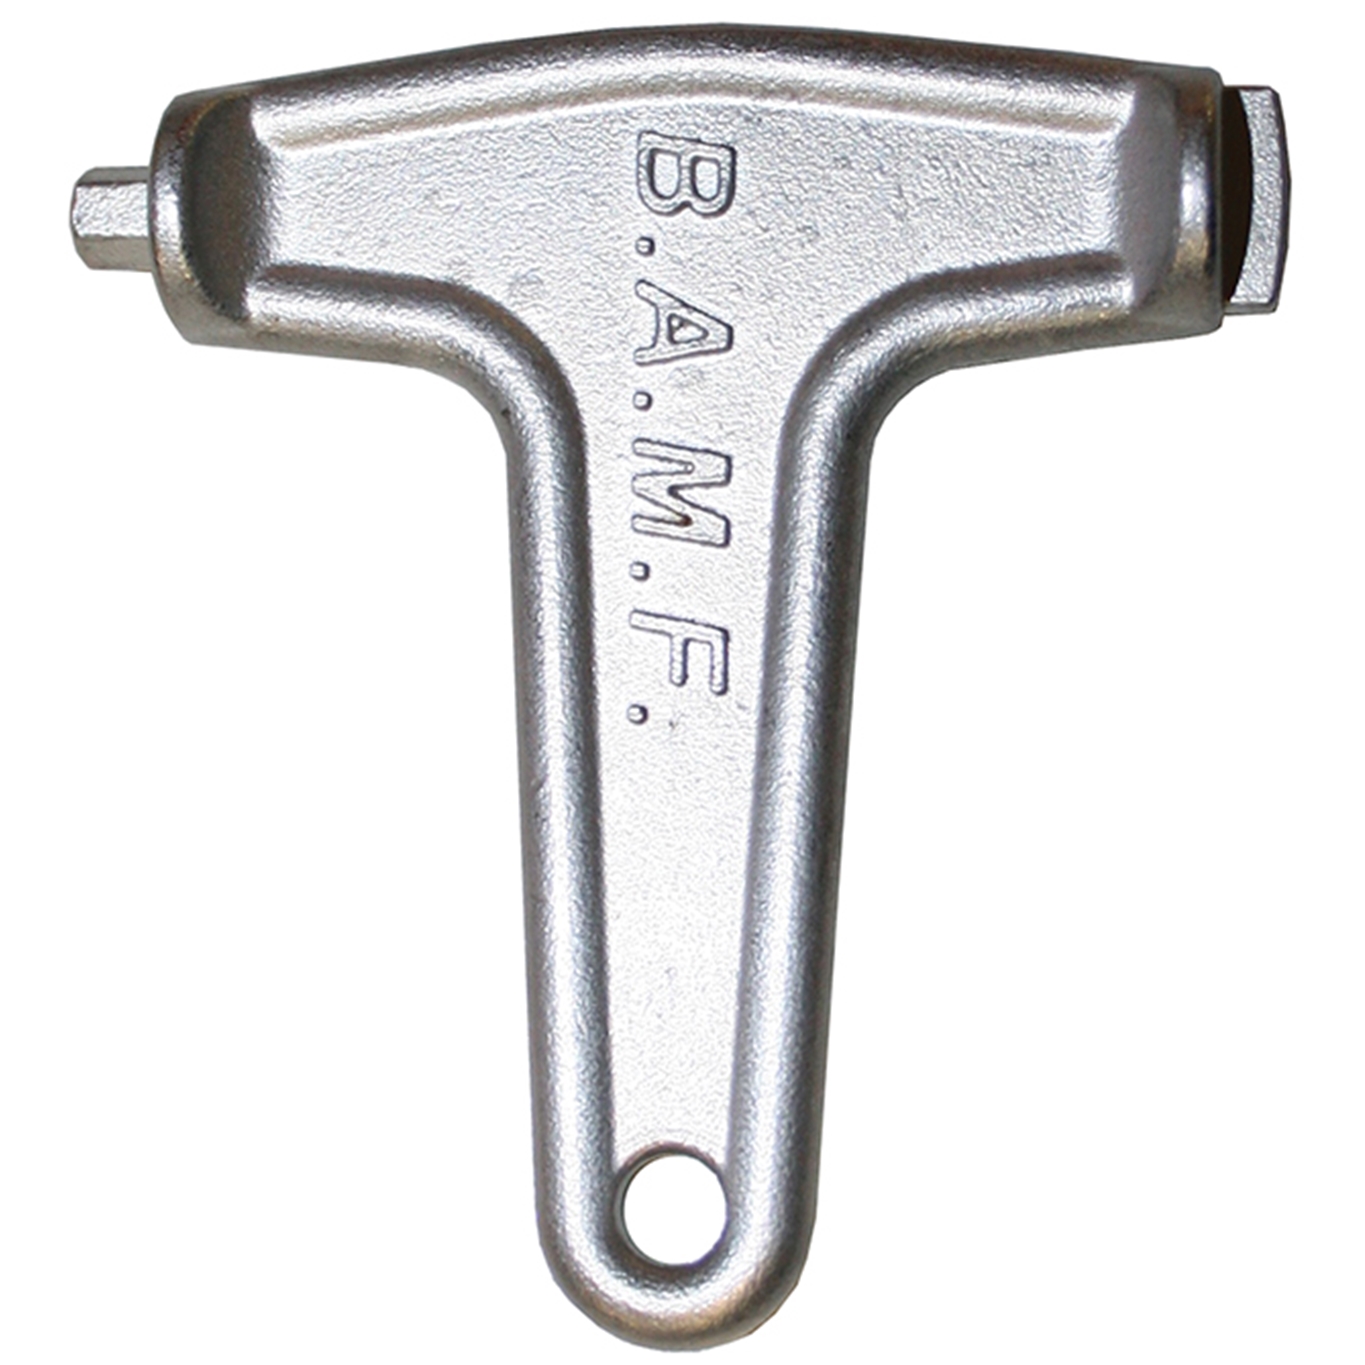 Panelfast 7/16" Slotted And Hex Fastener Tool